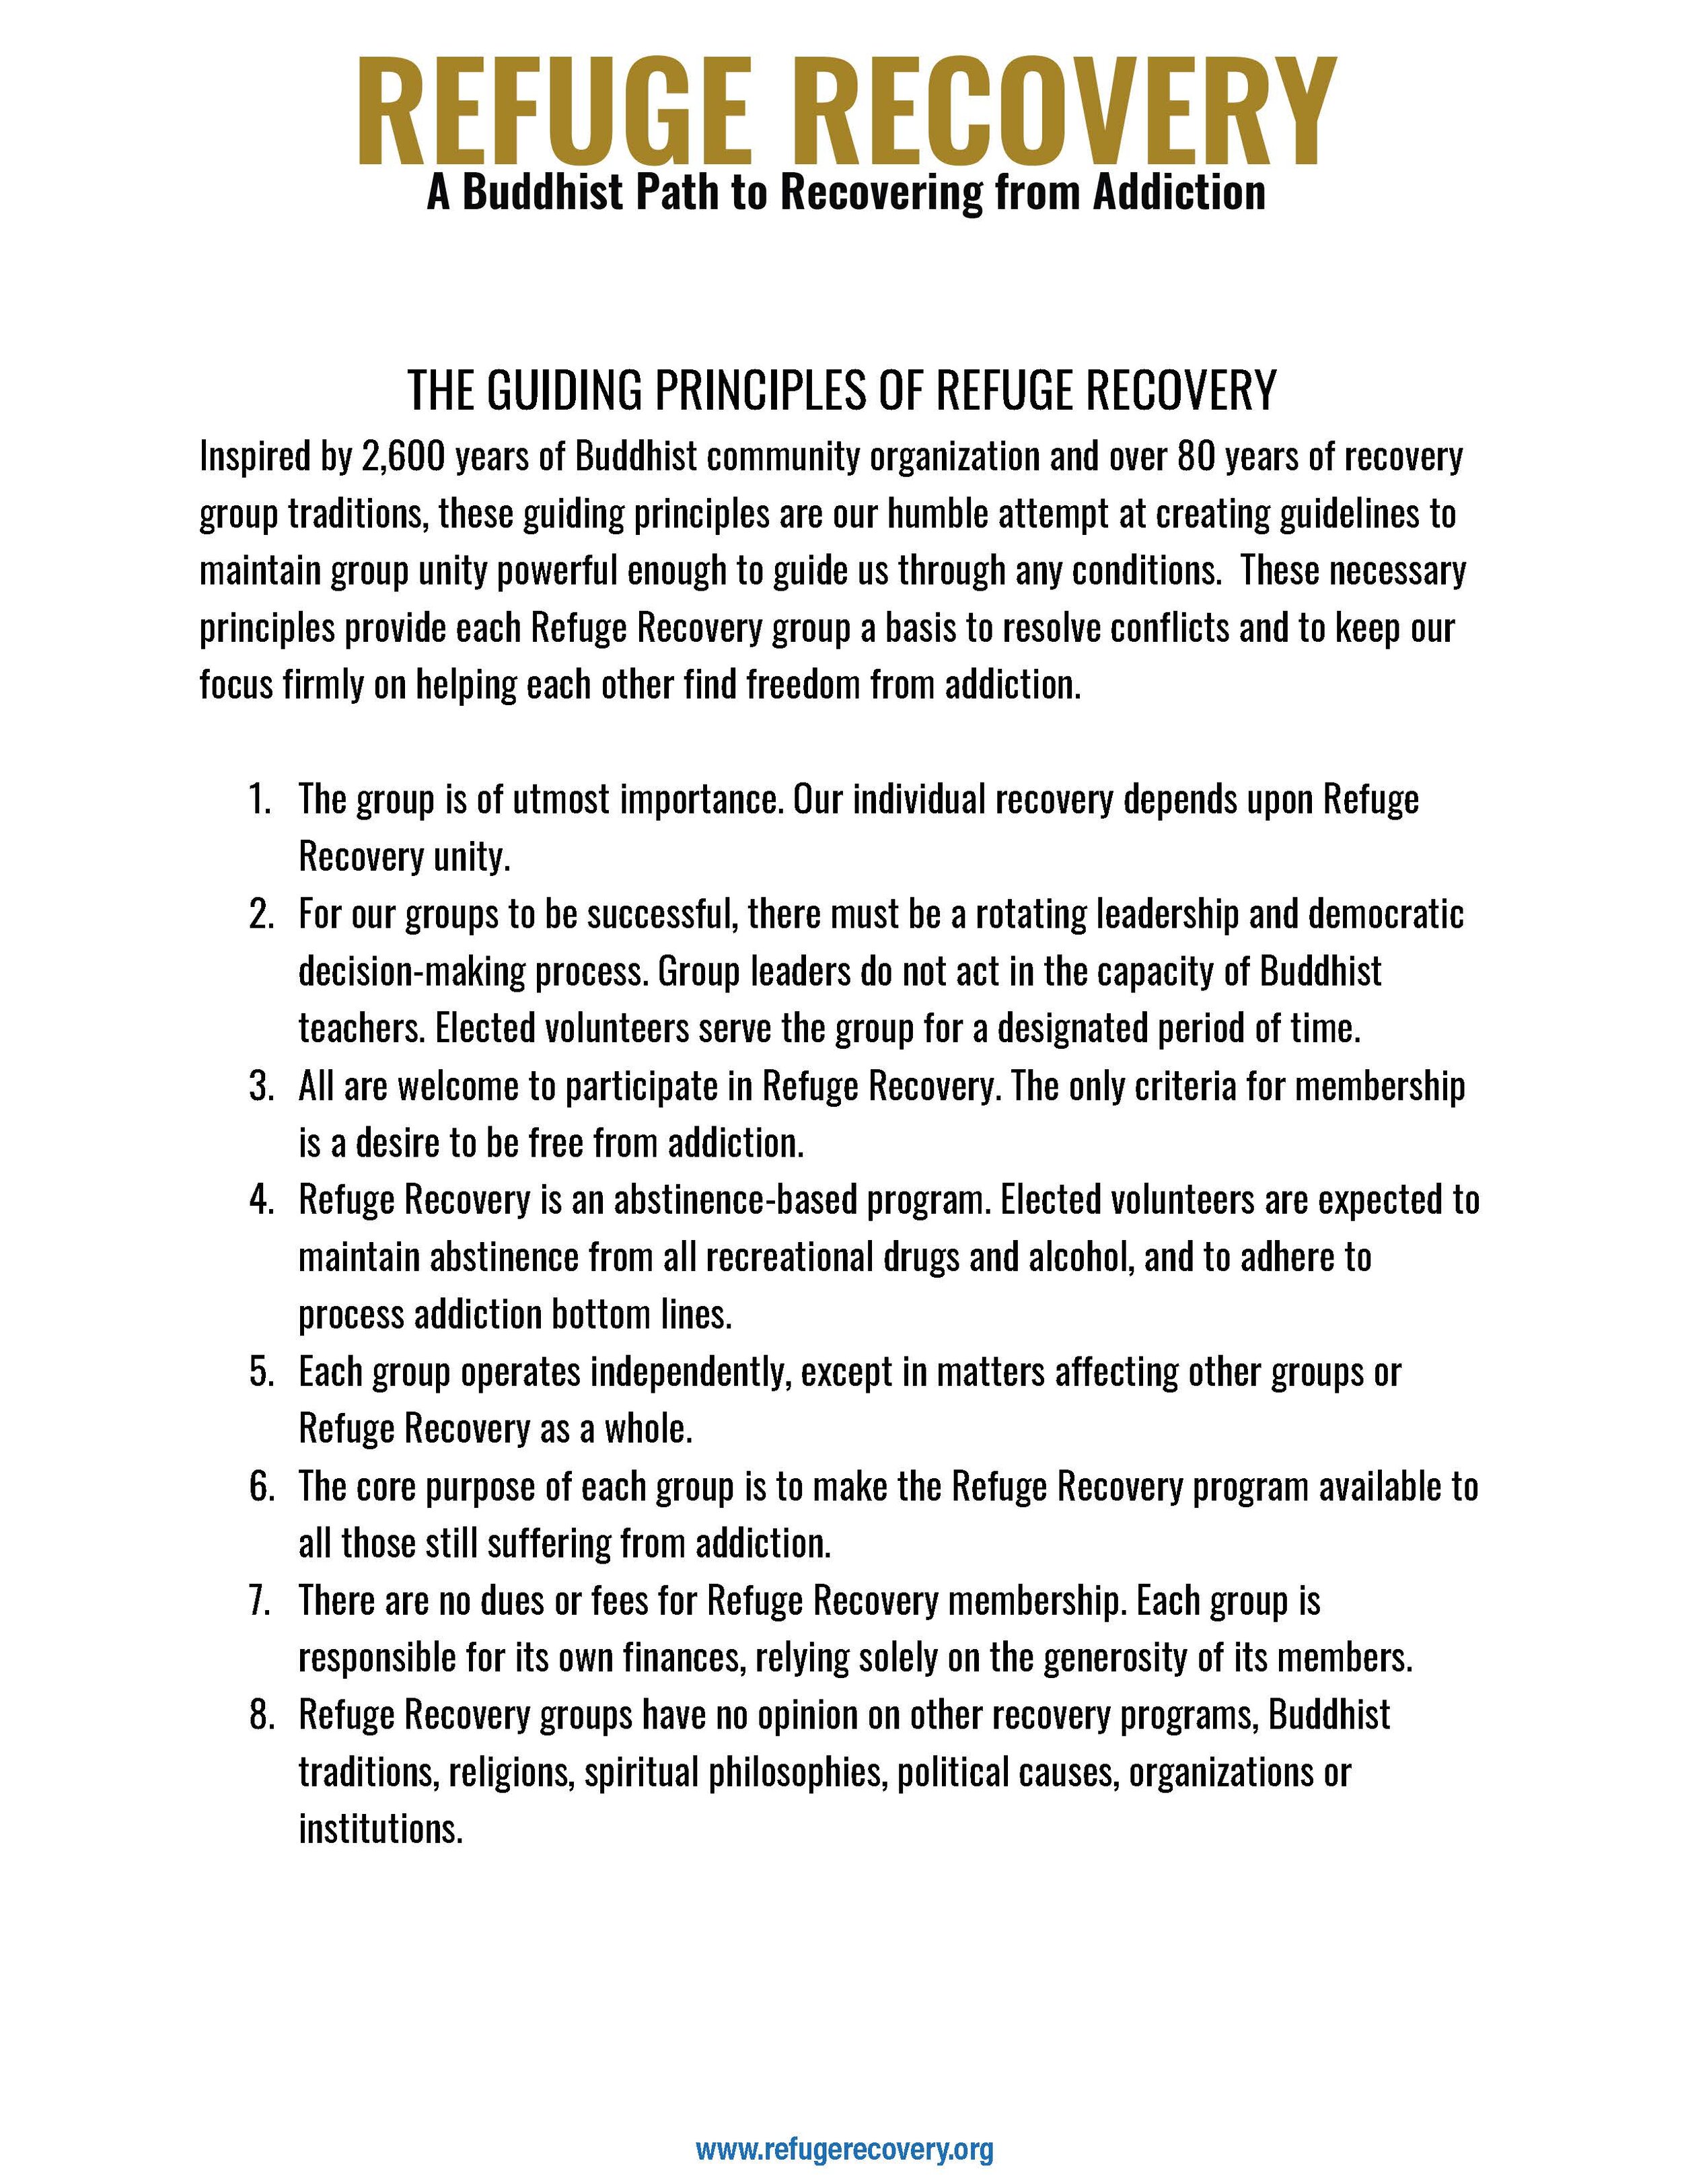 THE GUIDING PRINCIPLES OF REFUGE RECOVERY_Page_1.jpg